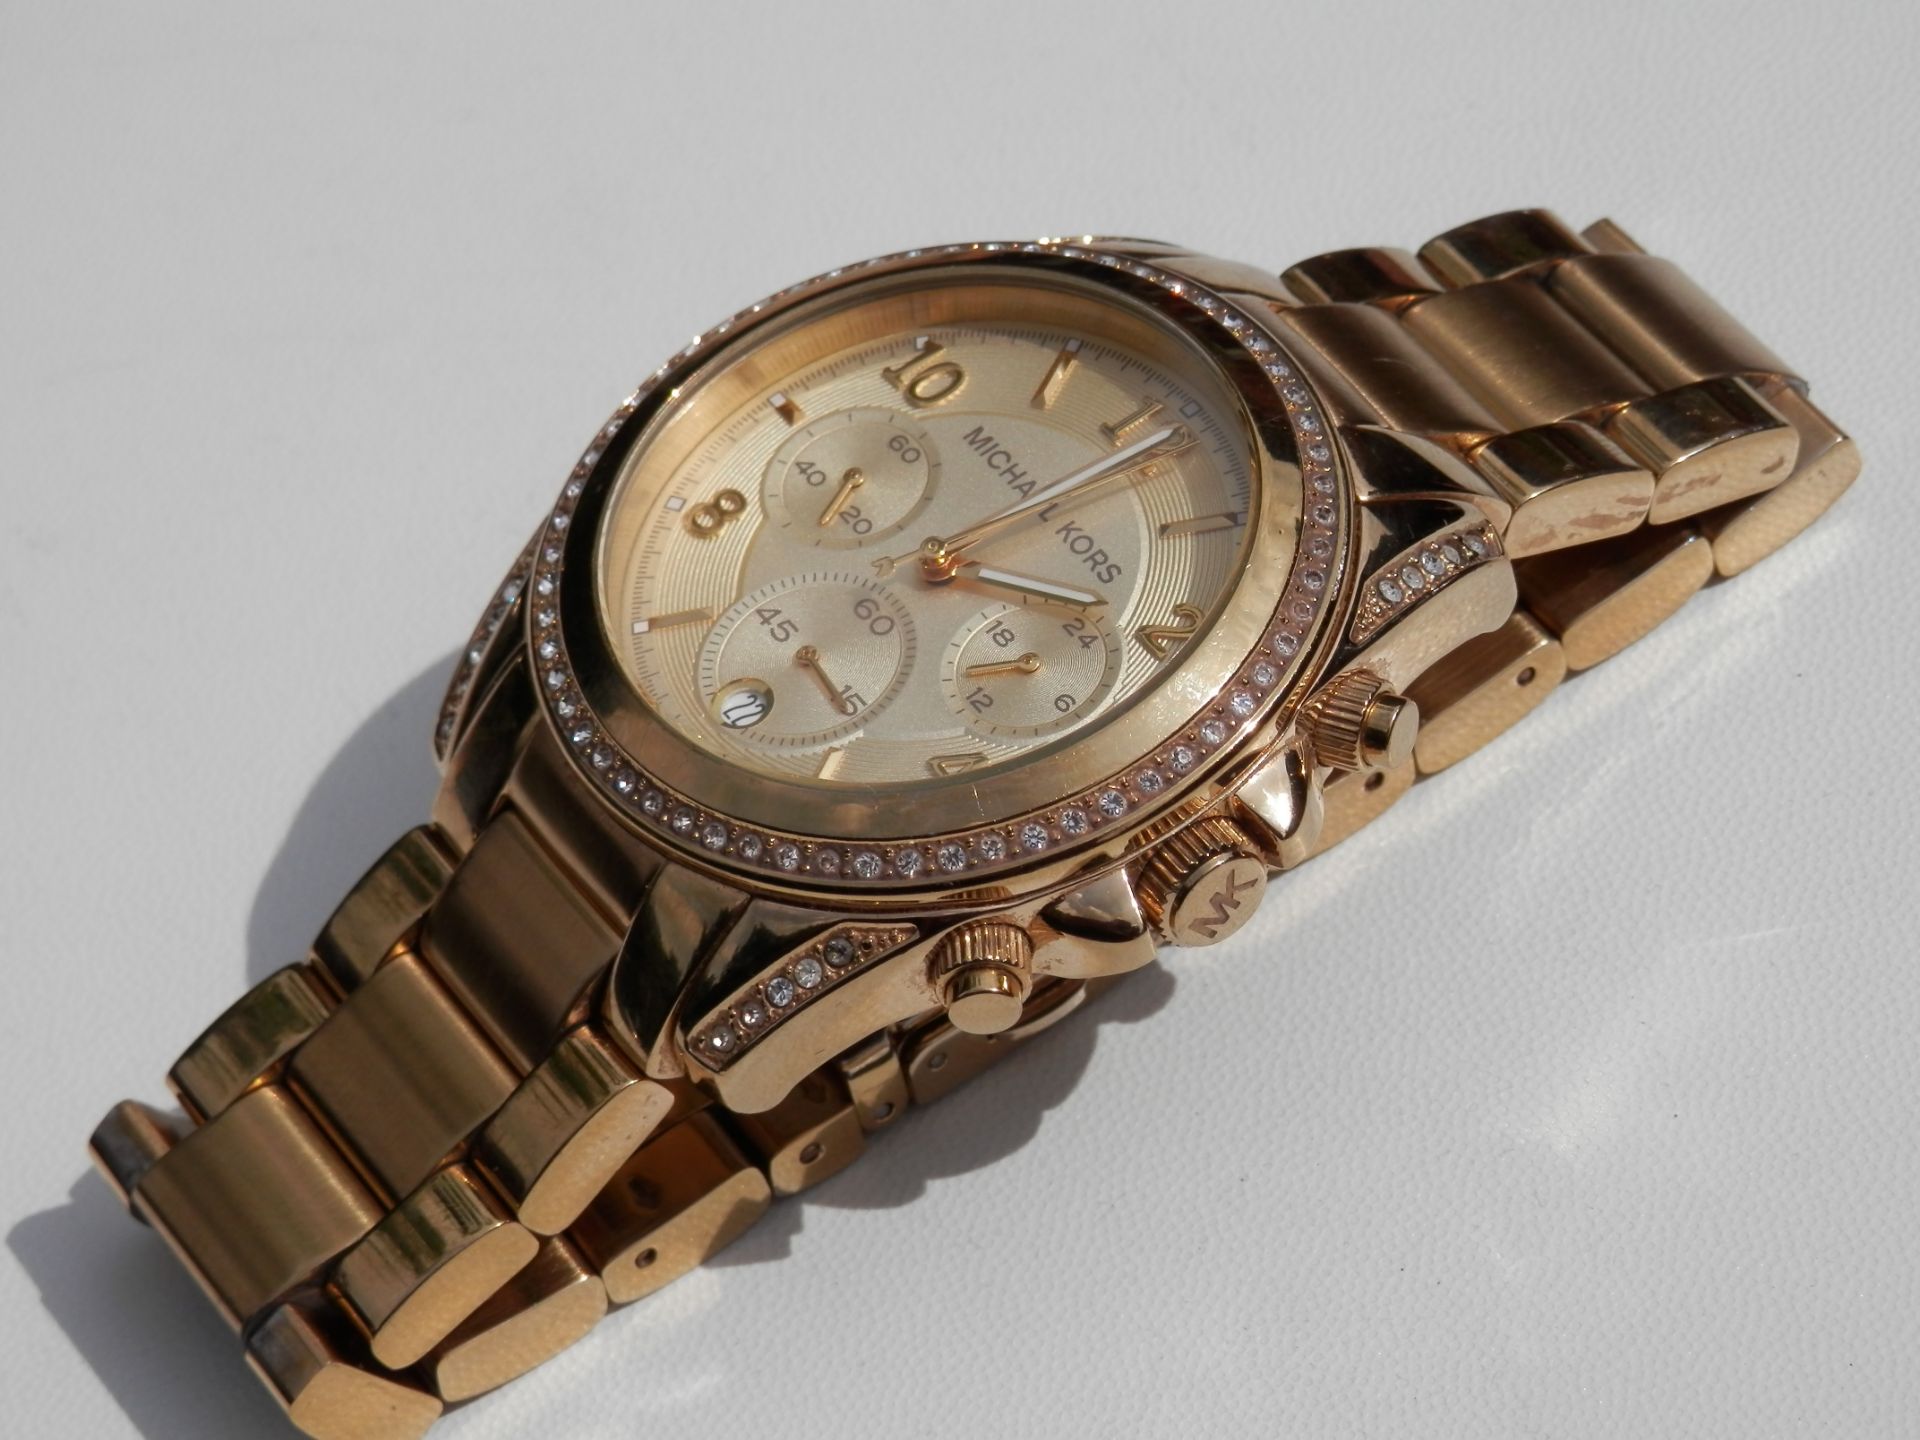 RRP £240. SUPERB LADIES MICHAEL KORS FULL STAINLESS GOLD PLATED DIAMANTE ENCRUSTED CHRONO DATE WATCH - Image 6 of 16